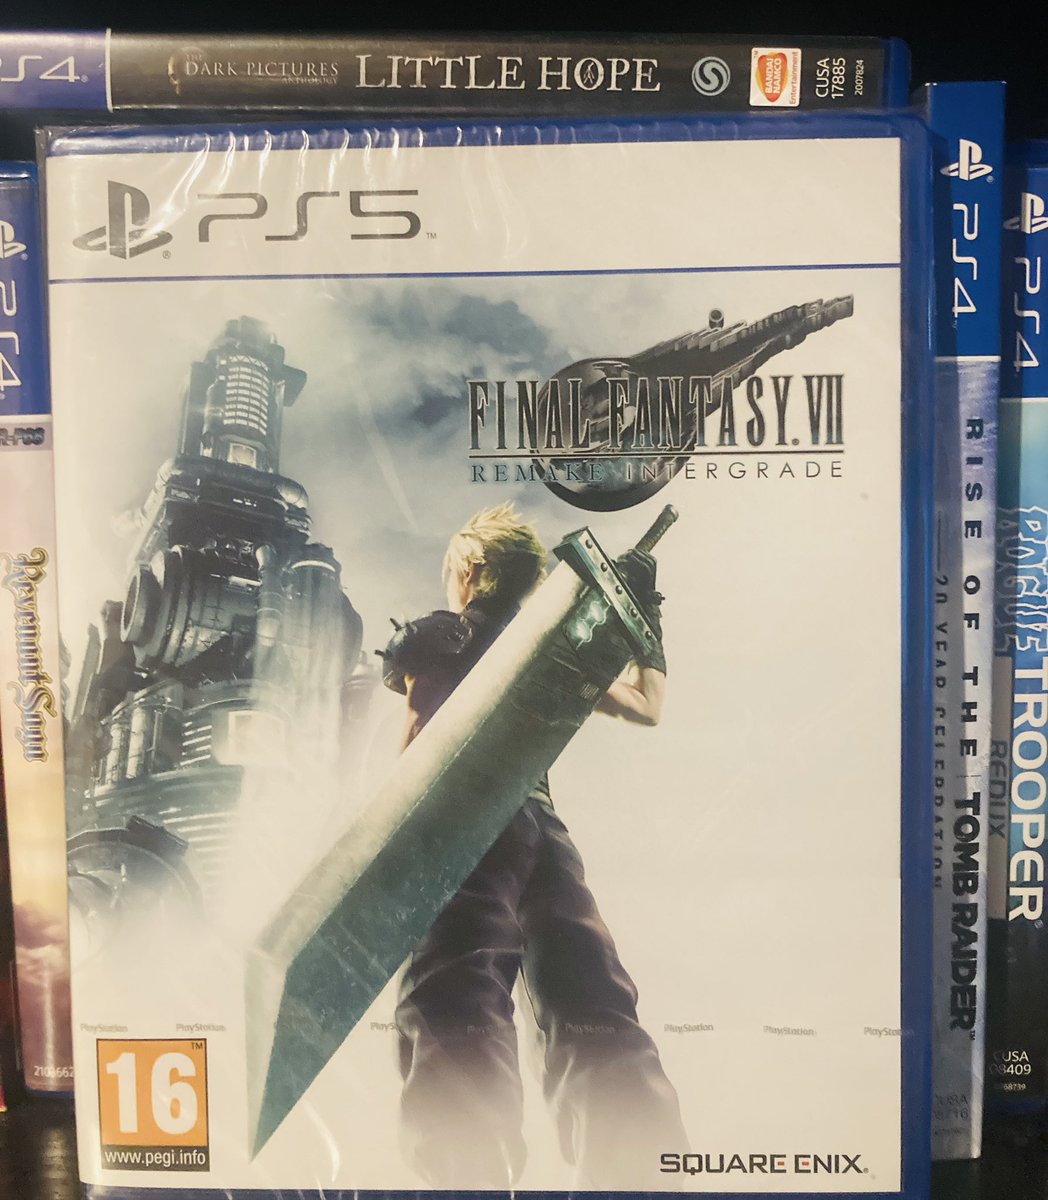 Got the PS5 version of Final Fantasy VII. Shame INTERmission is a code in the box. Relatively hard to find sealed over here. I’ll be opening it soon! #FinalFantasy #PlayStation5 #PS5